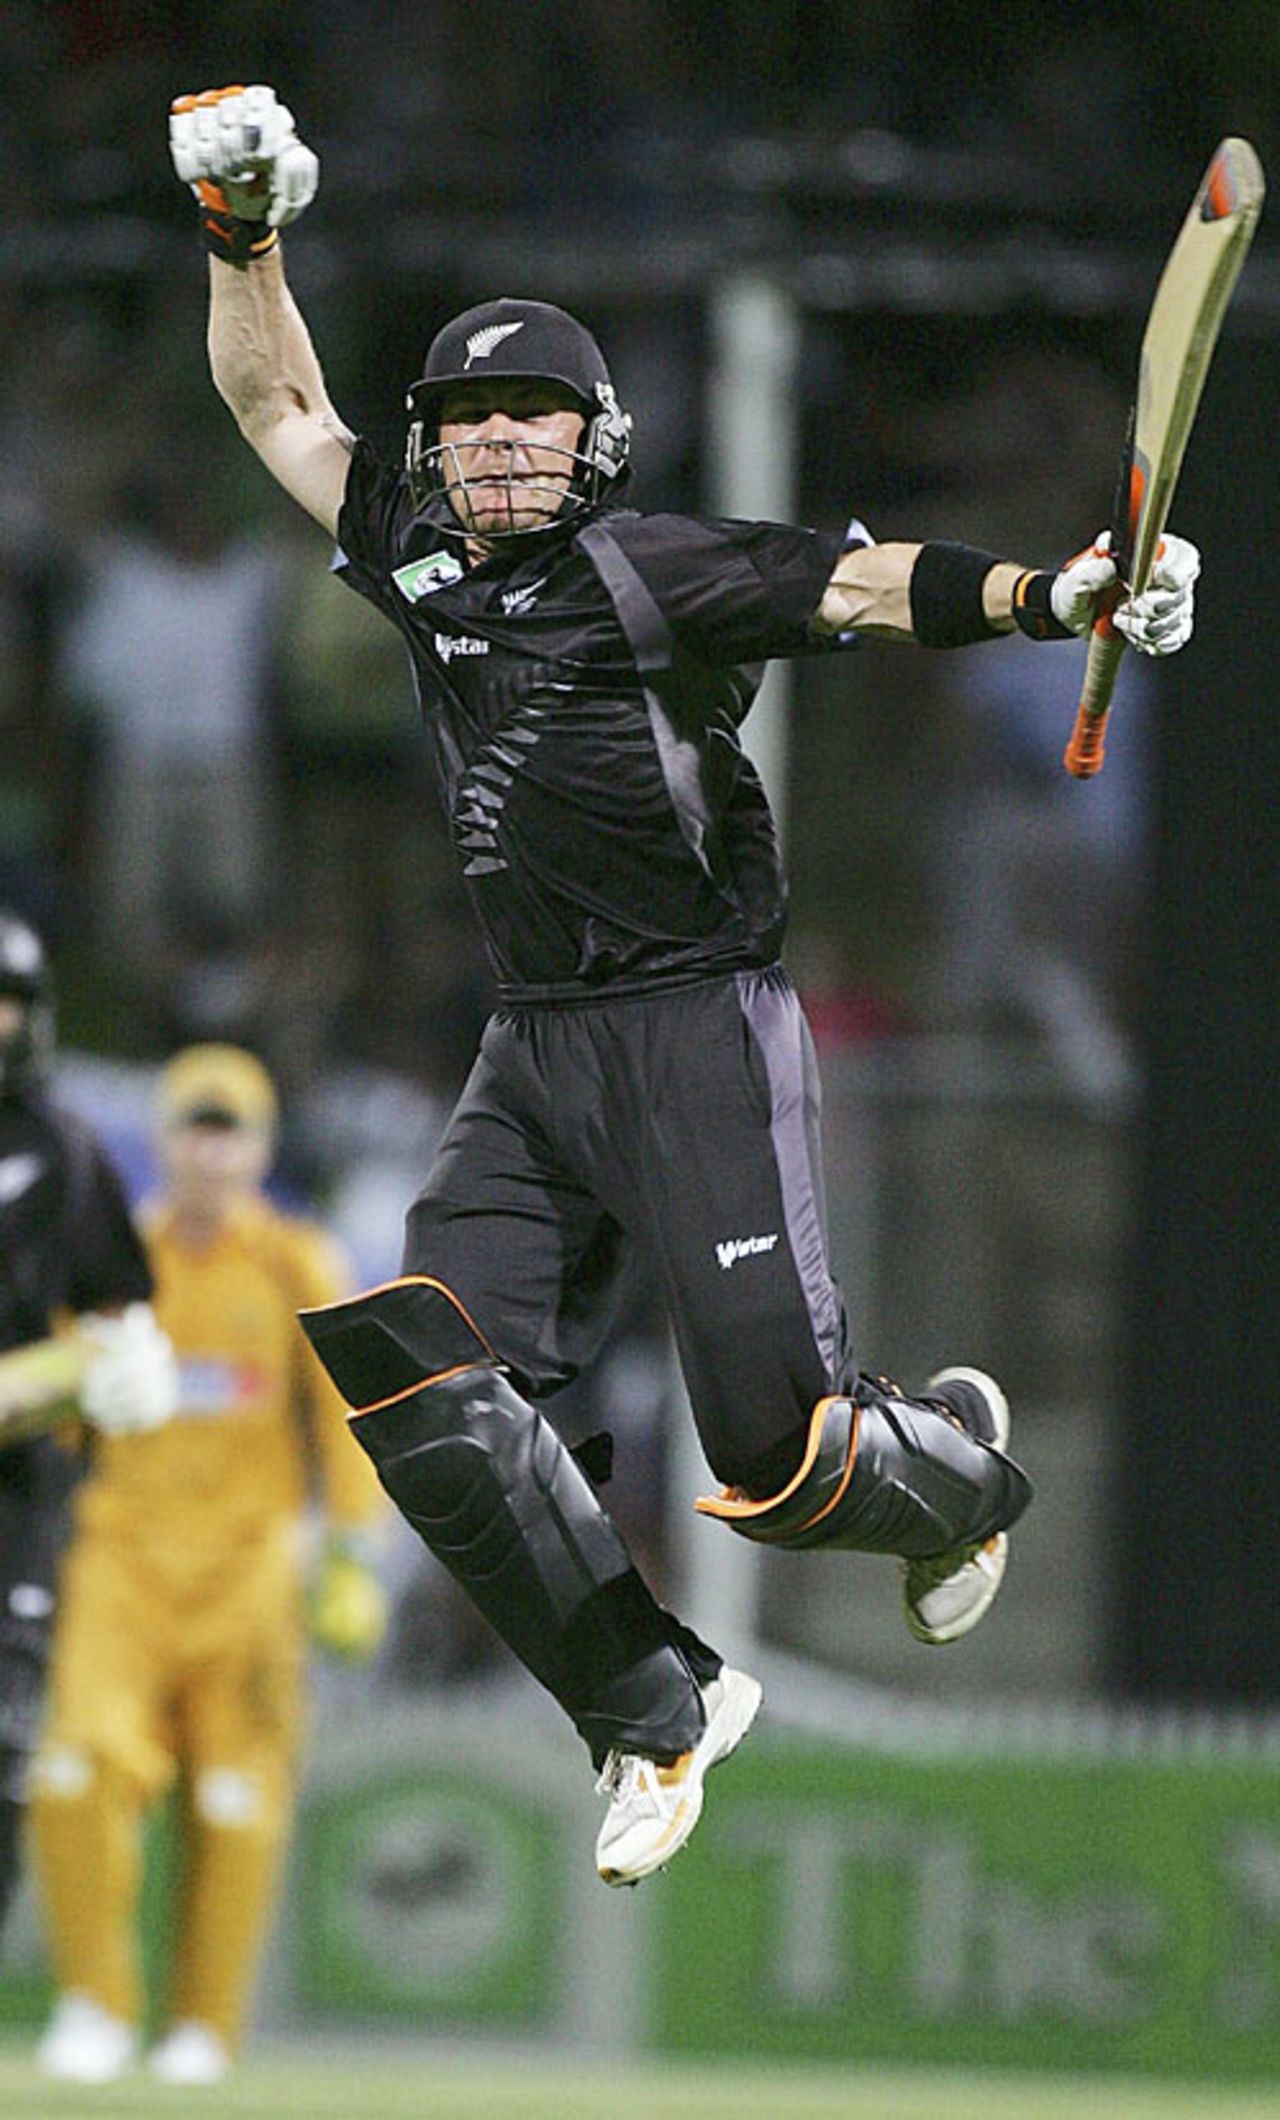 Brendon McCullum jumps in the air after leading New Zealand to a thrilling 3-0 whitewash over Australia, New Zealand v Australia, Chappell-Hadlee Trophy, 3rd match, Hamilton, February 20, 2007